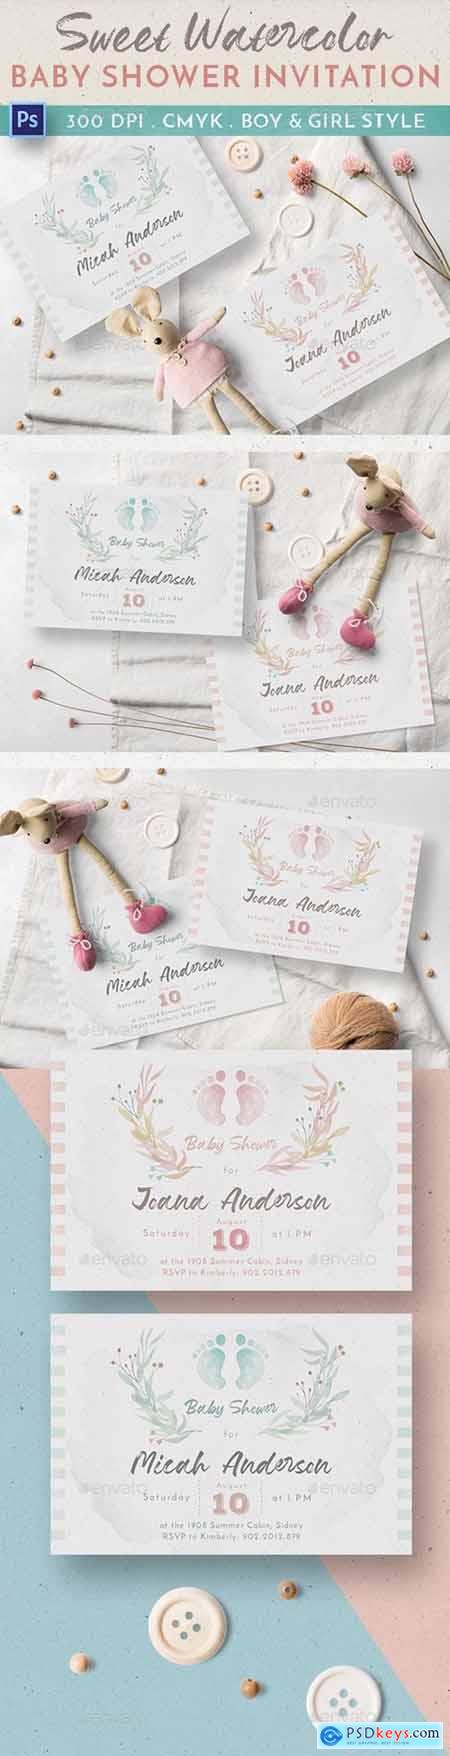 Sweet Watercolor Baby Shower Invitation